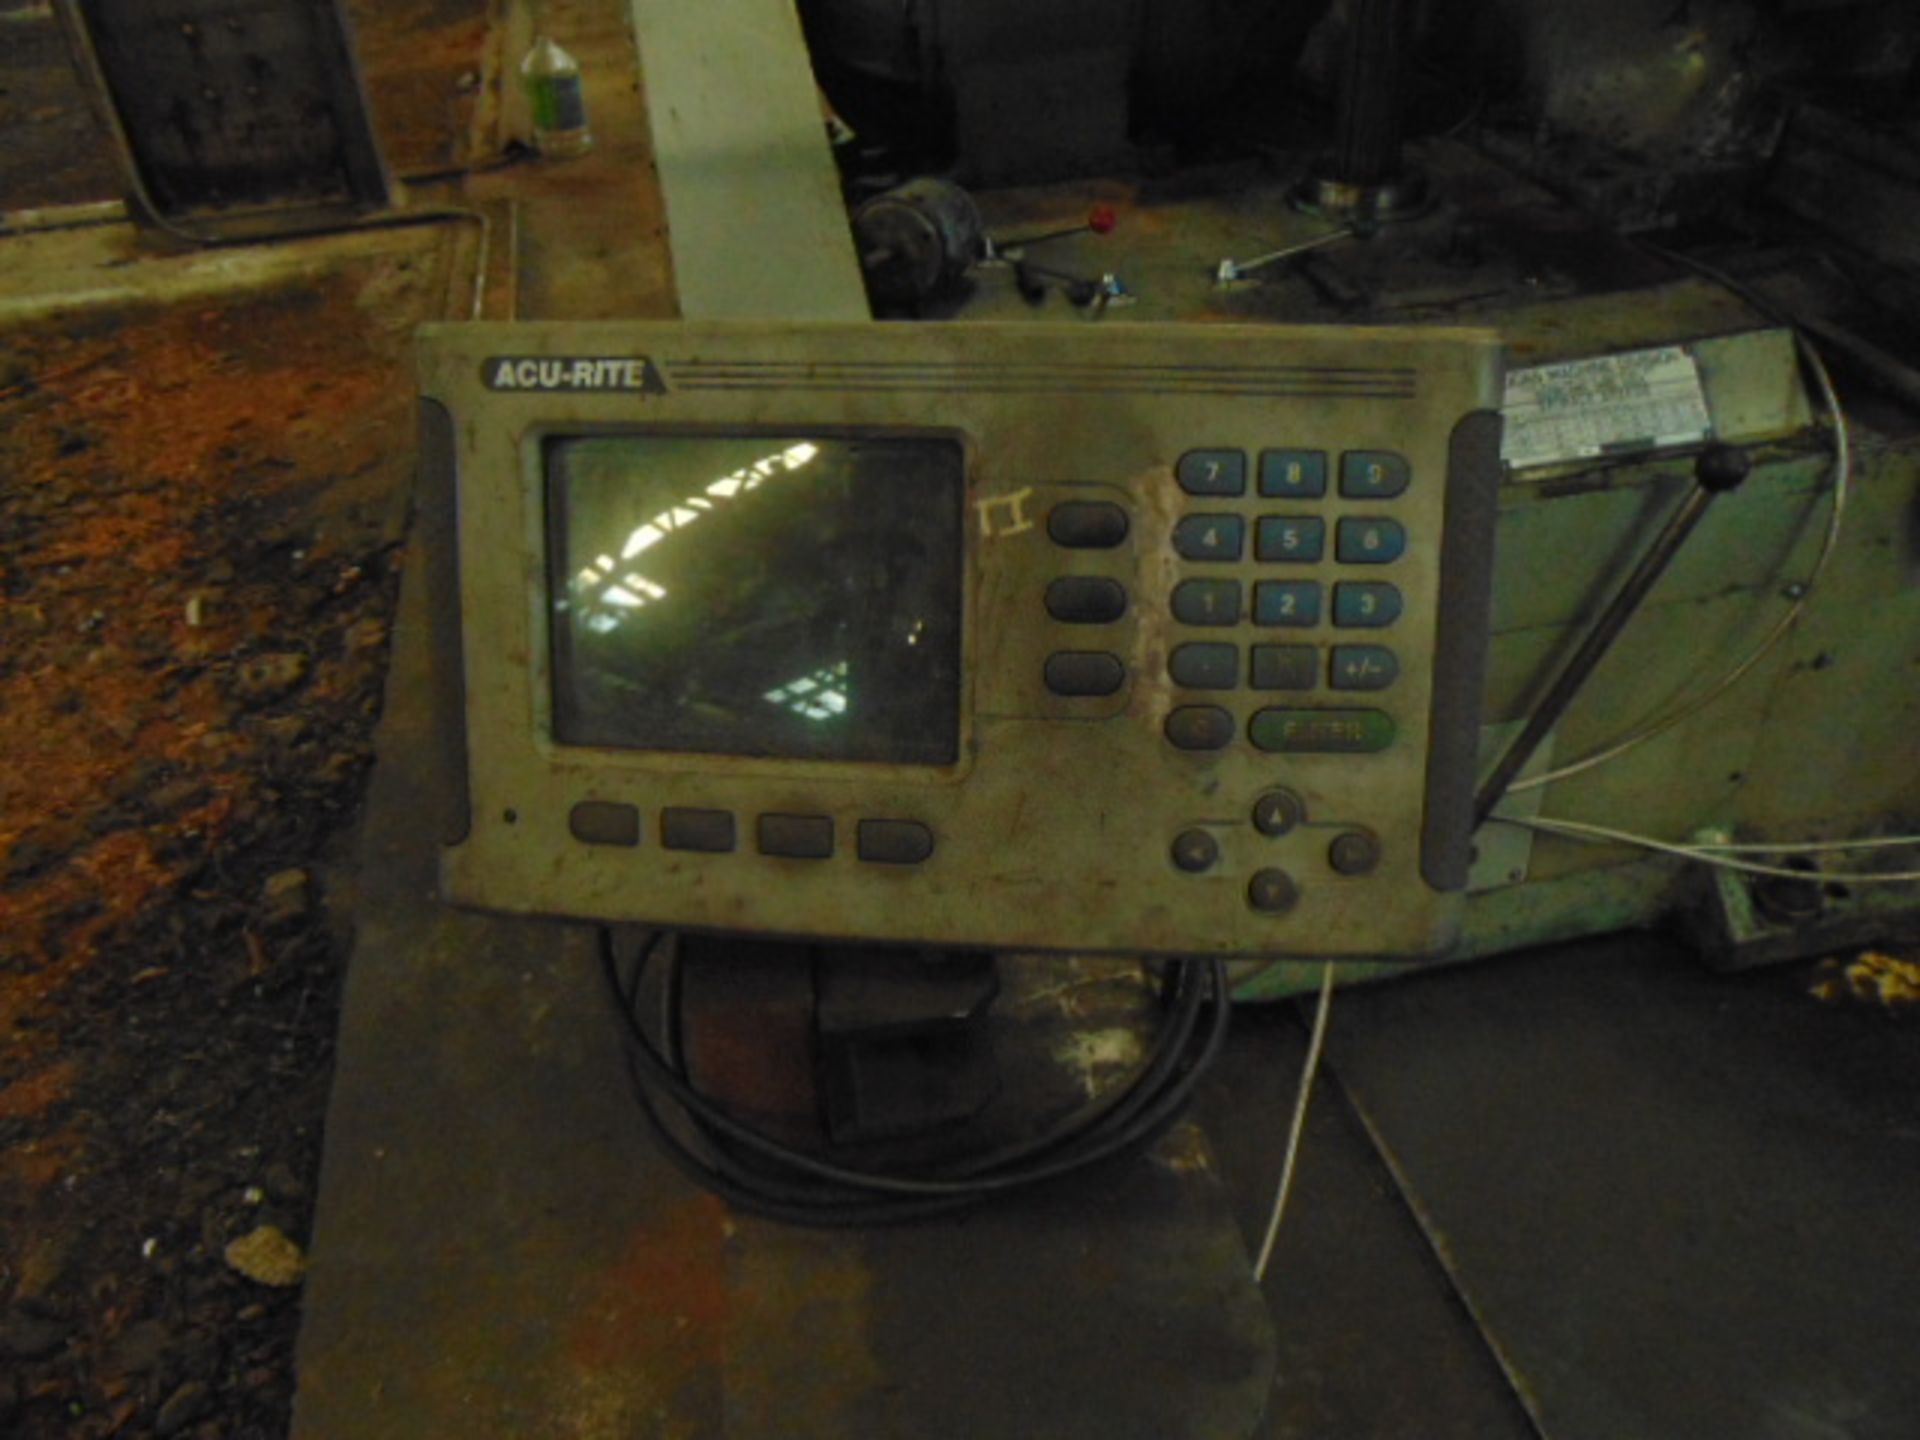 TABLE TYPE HORIZONTAL BORING MILL, LUCAS MDL. 428-60, 40" x 74" tbl., 60" cross travel, approx. - Image 8 of 16